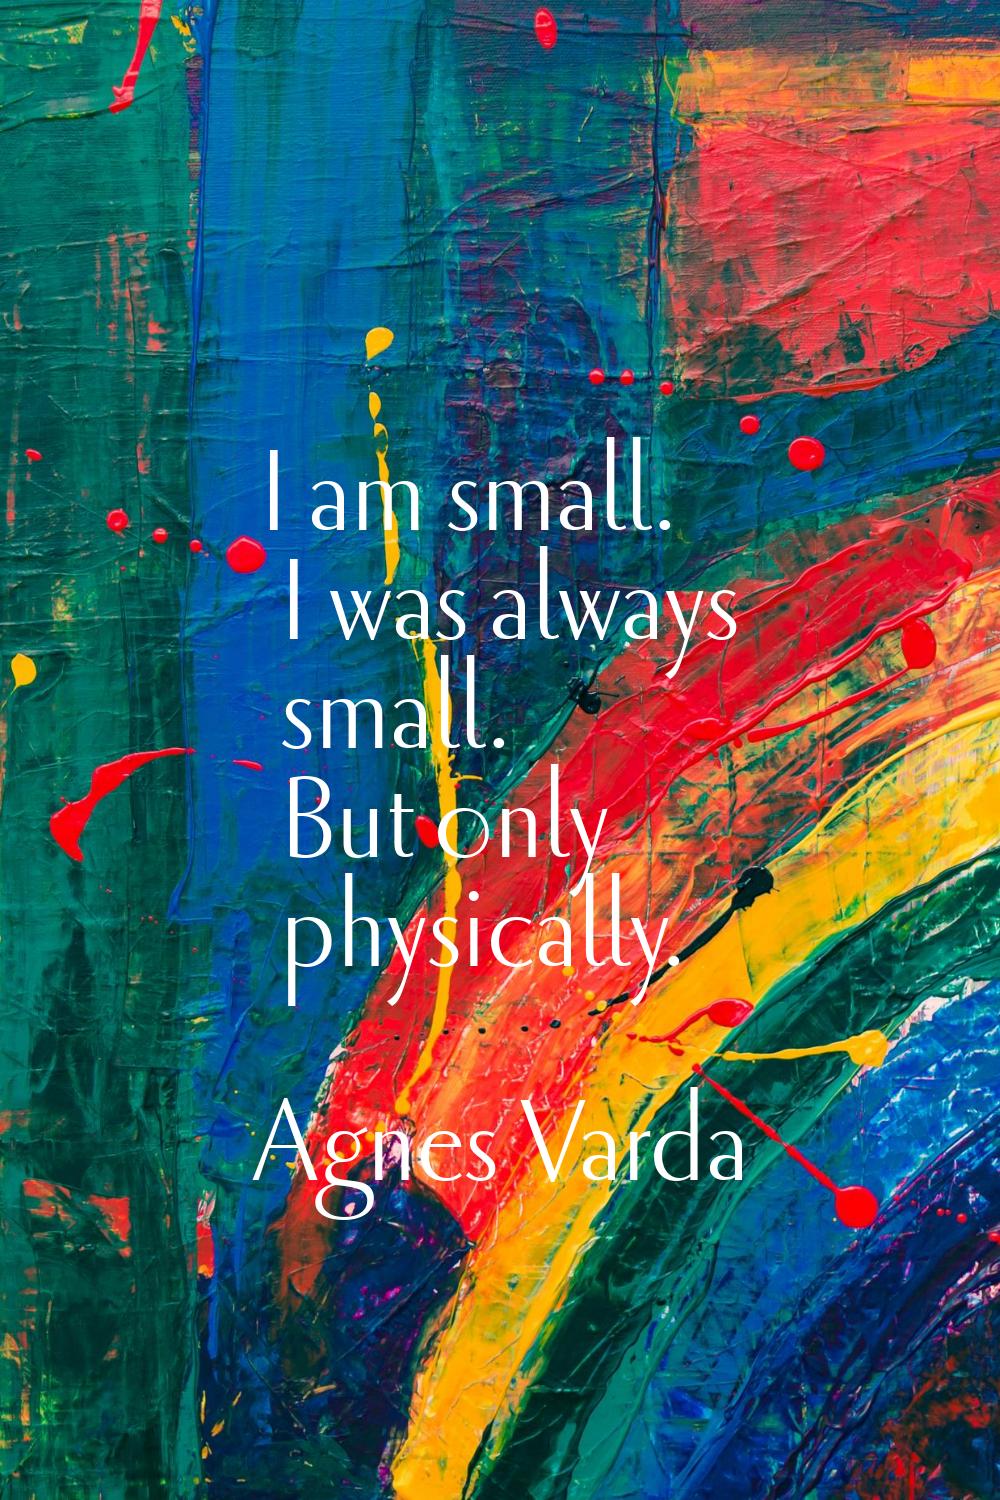 I am small. I was always small. But only physically.